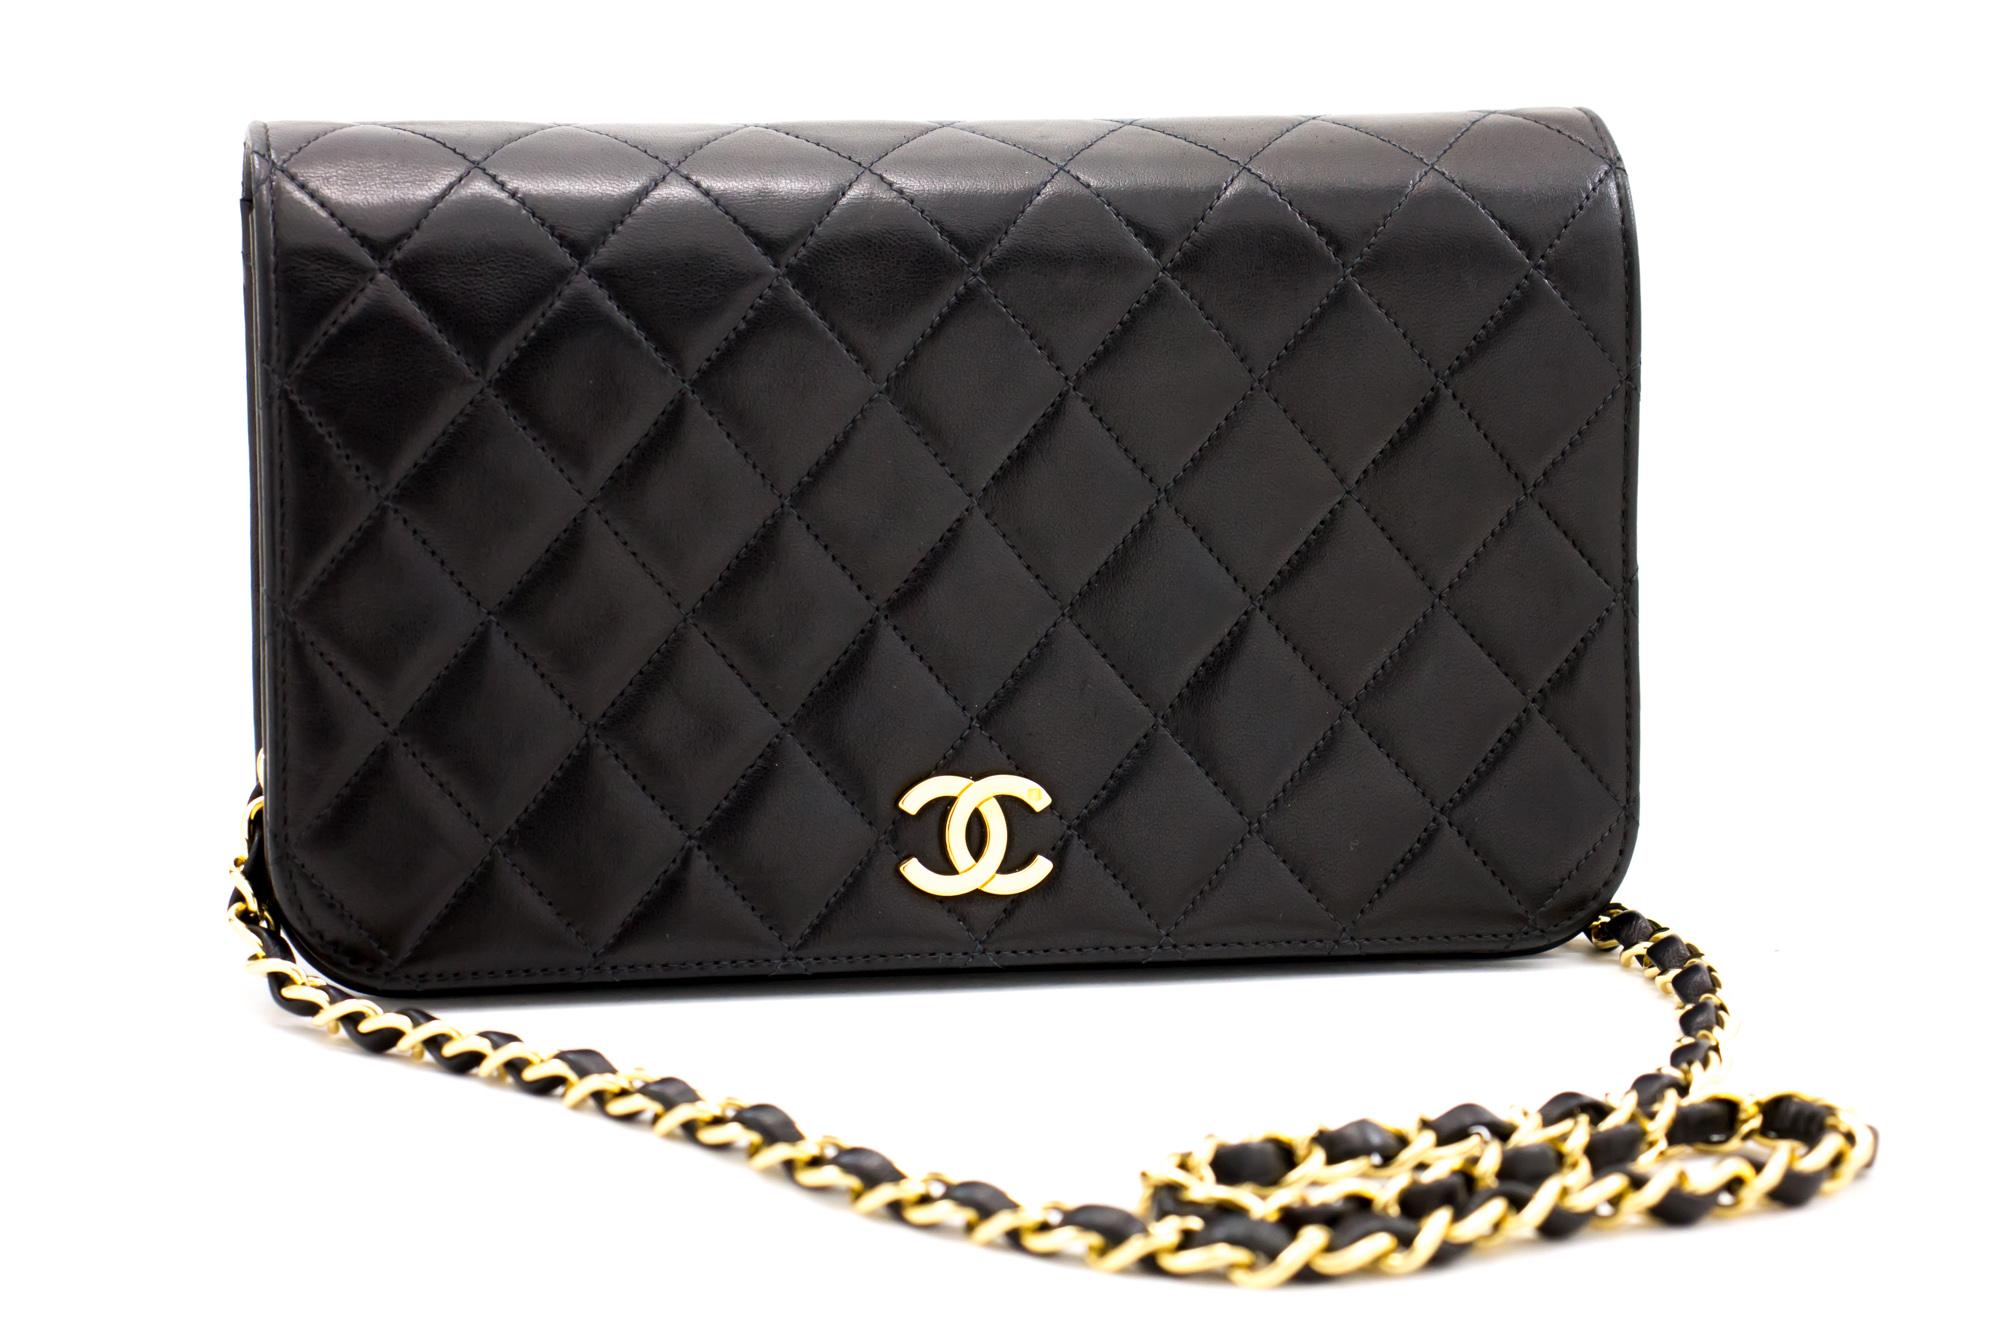 An authentic CHANEL Full Flap Chain Shoulder Bag Clutch Black Quilted made of black Lambskin. The color is Black. The outside material is Leather. The pattern is Solid. This item is Contemporary. The year of manufacture would be 2000-2 0 0 2